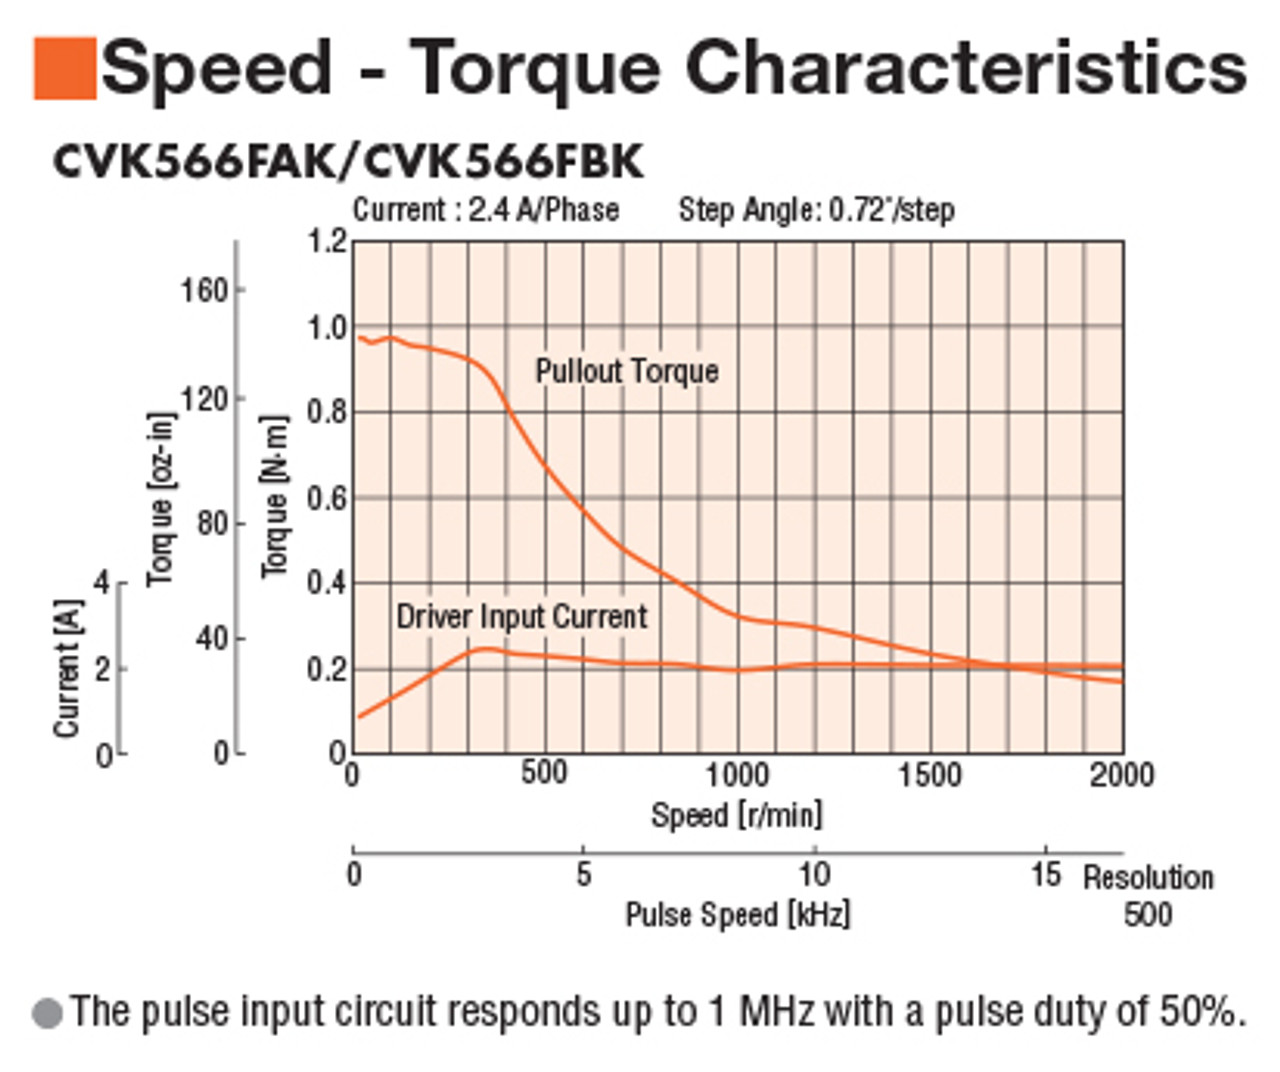 PKP566FN24AW - Speed-Torque